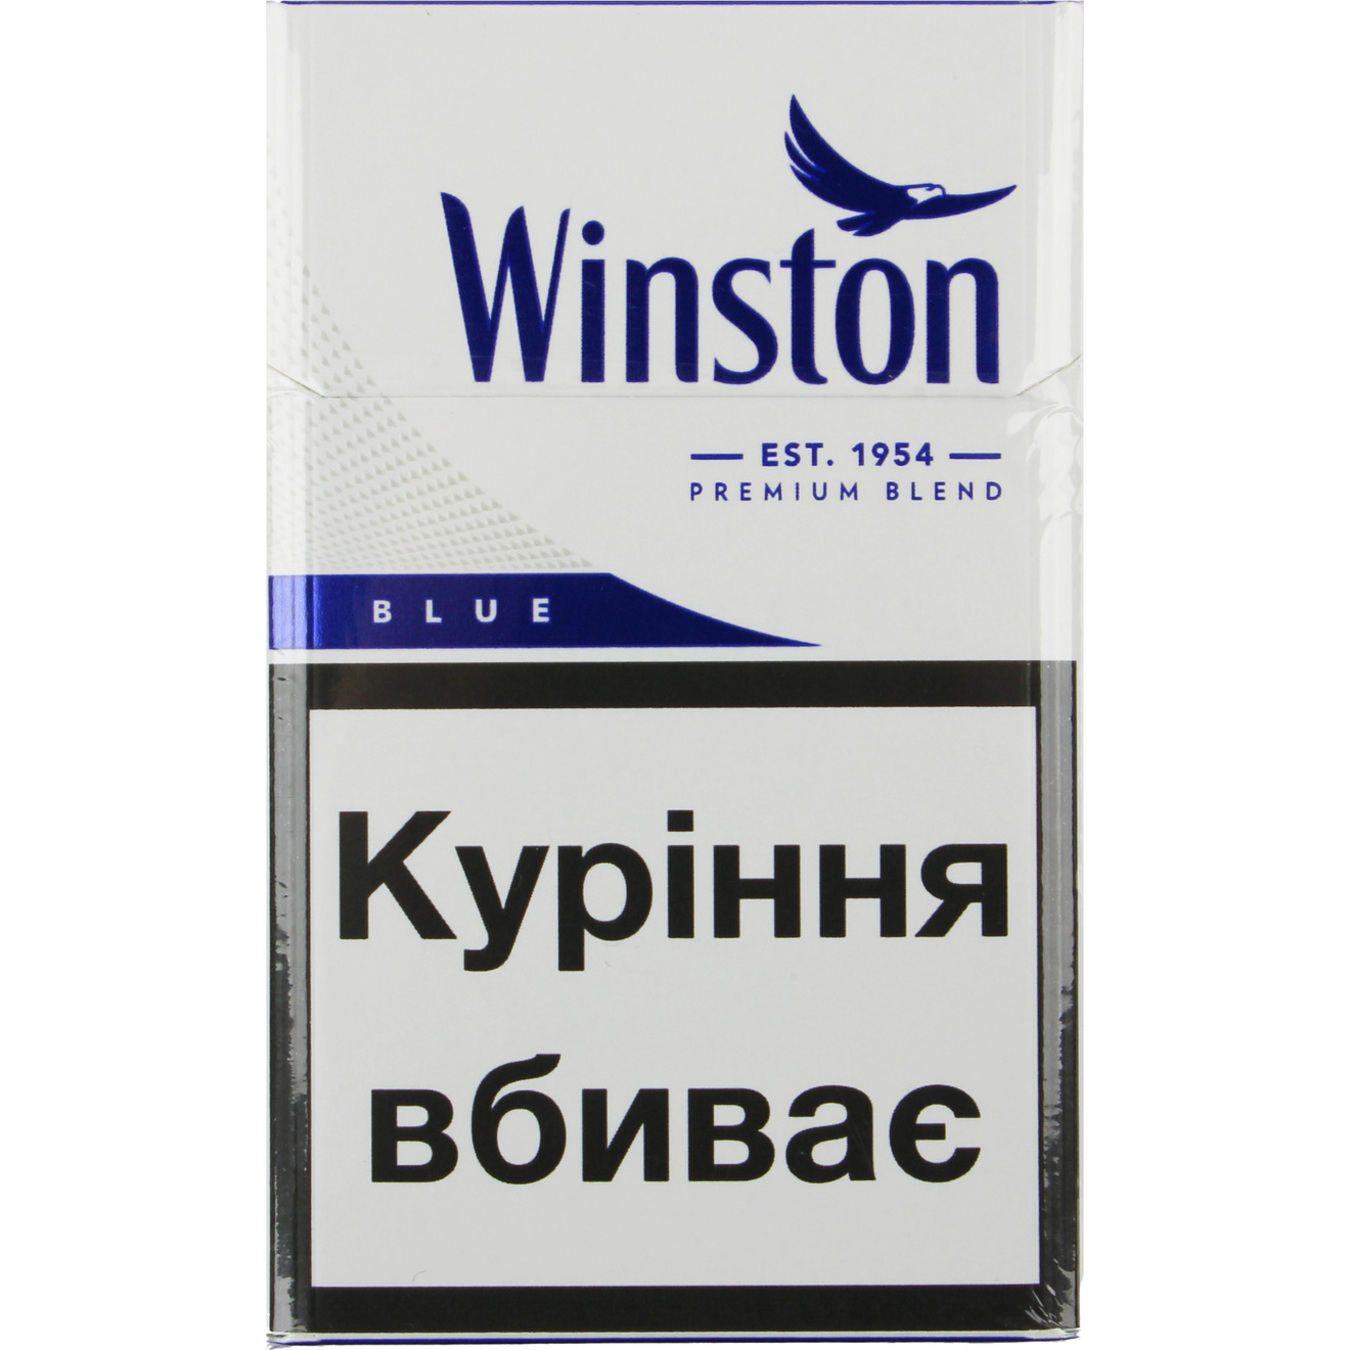 Winston Blue Cigarettes 20 pcs (the price is indicated without excise tax)